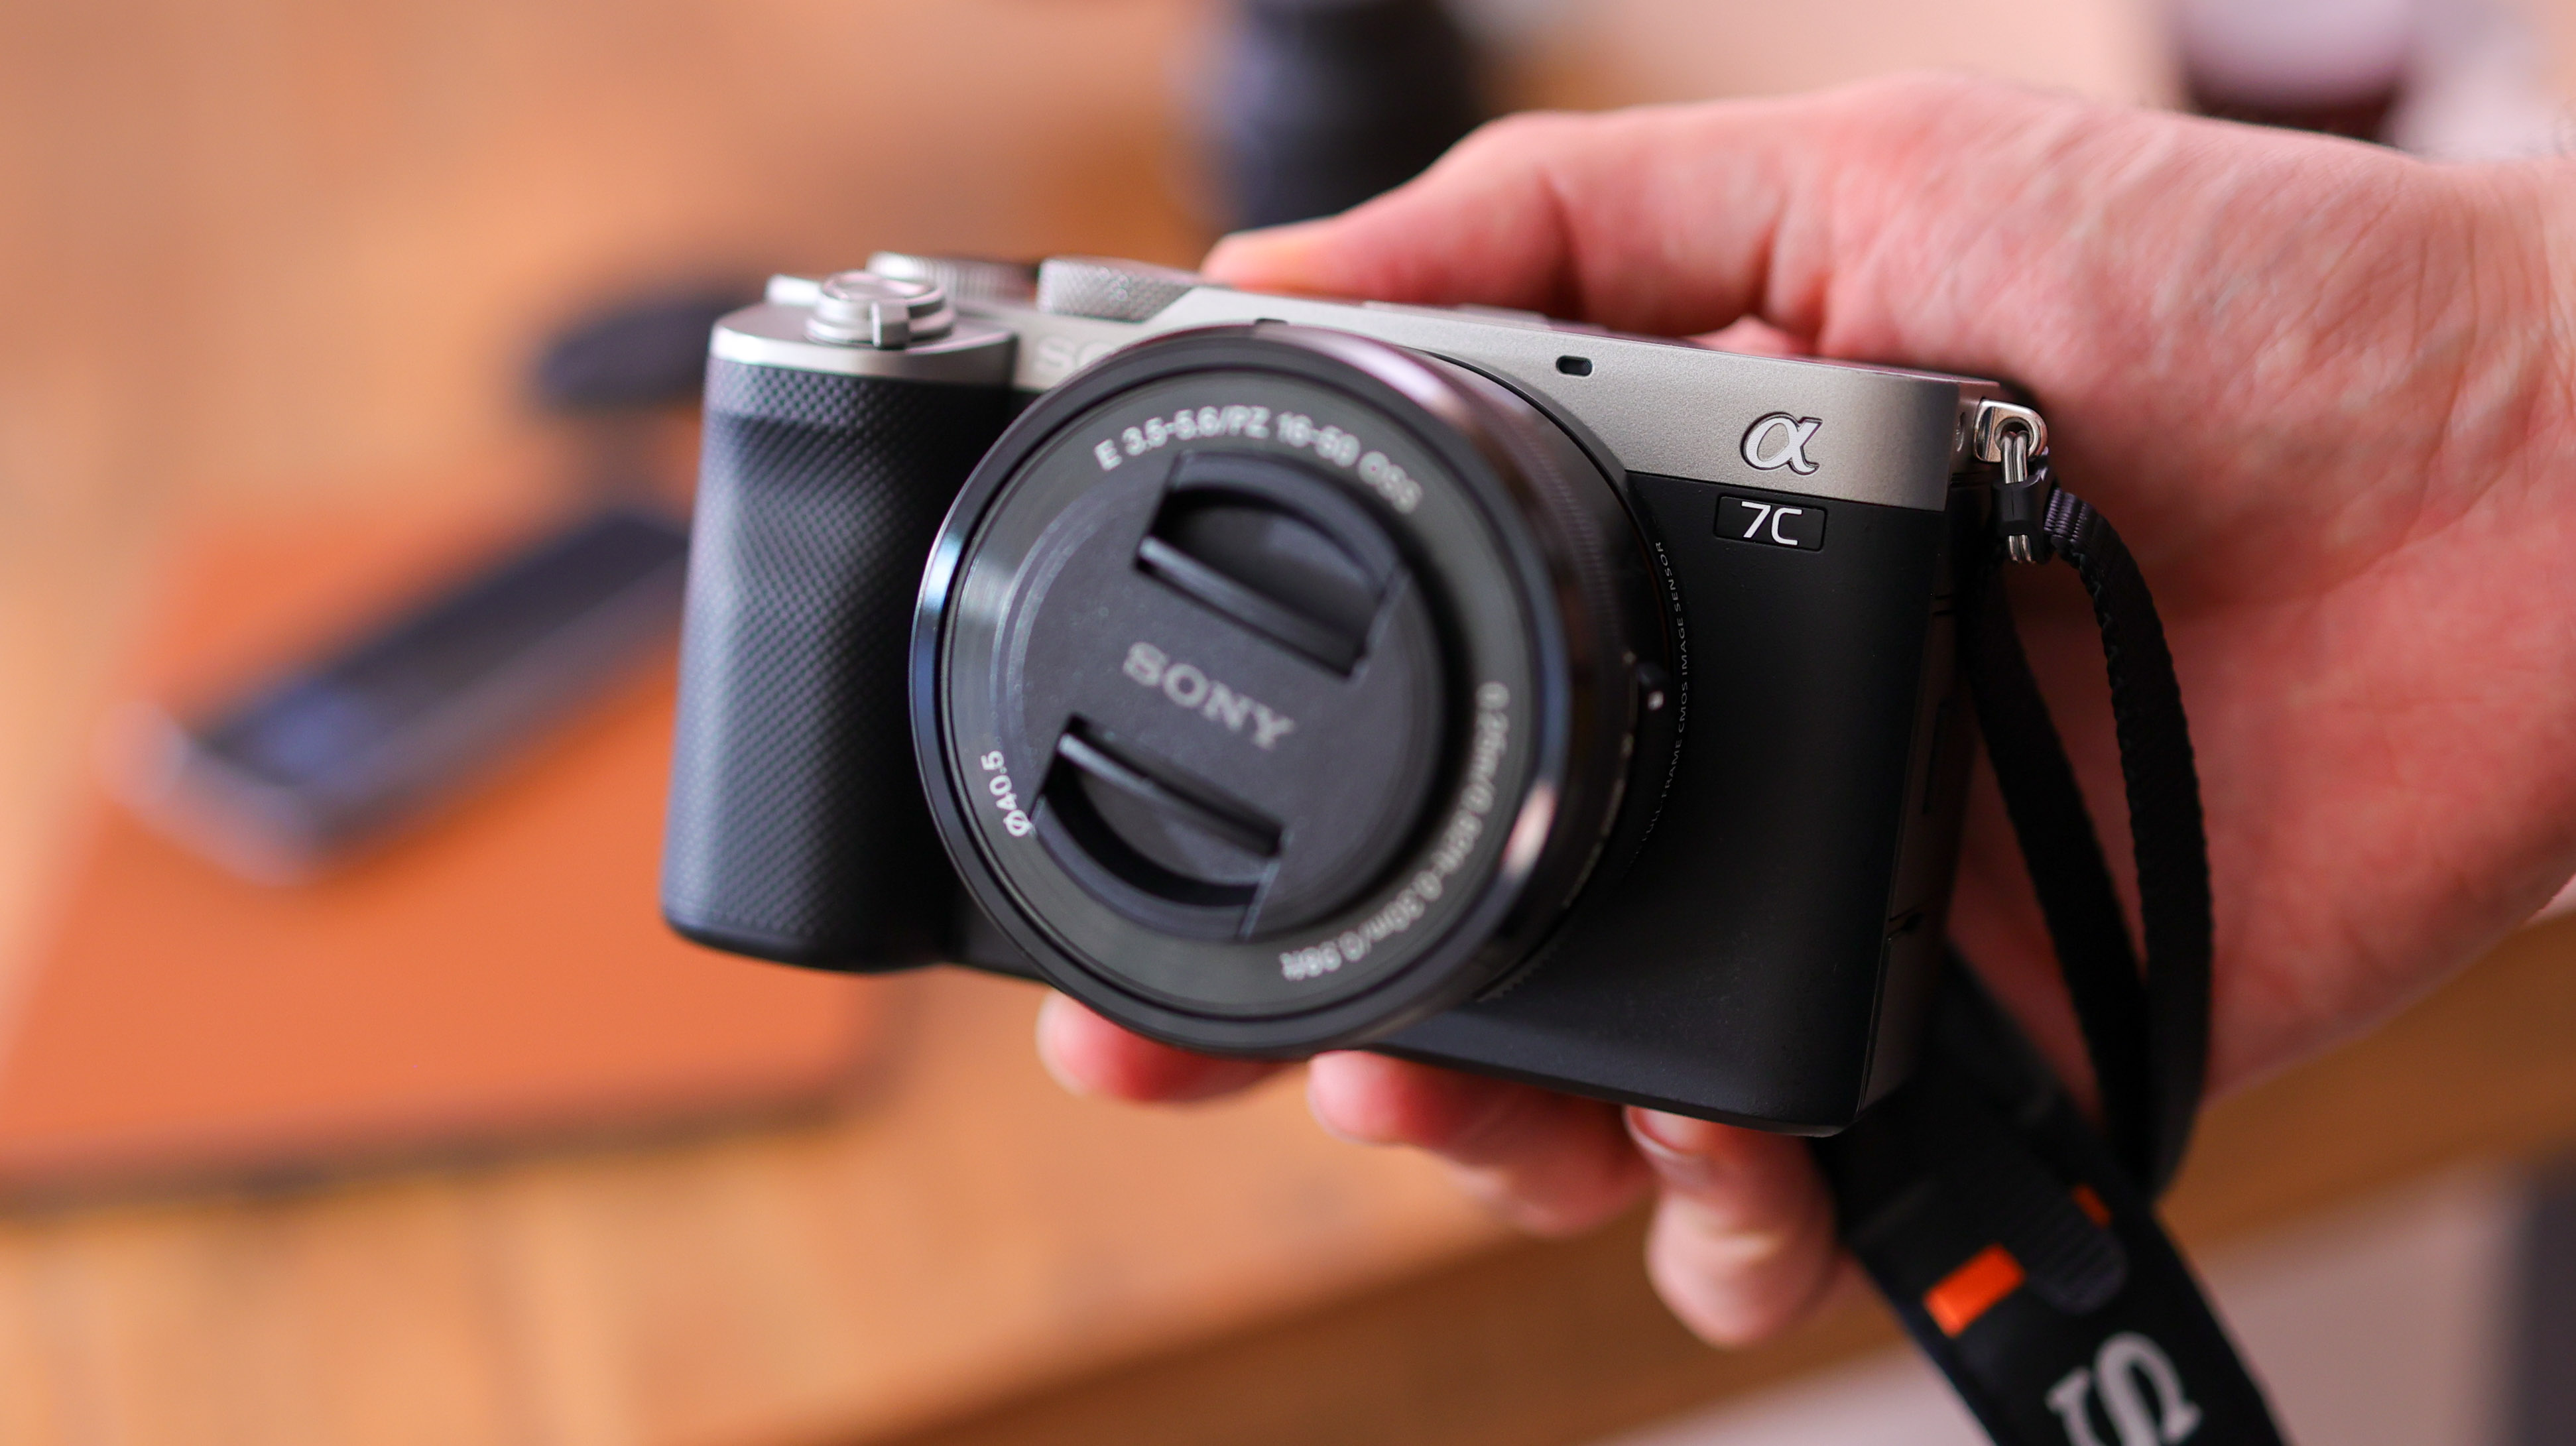 Sony announces $1,799 A7C compact full-frame mirrorless camera - The Verge